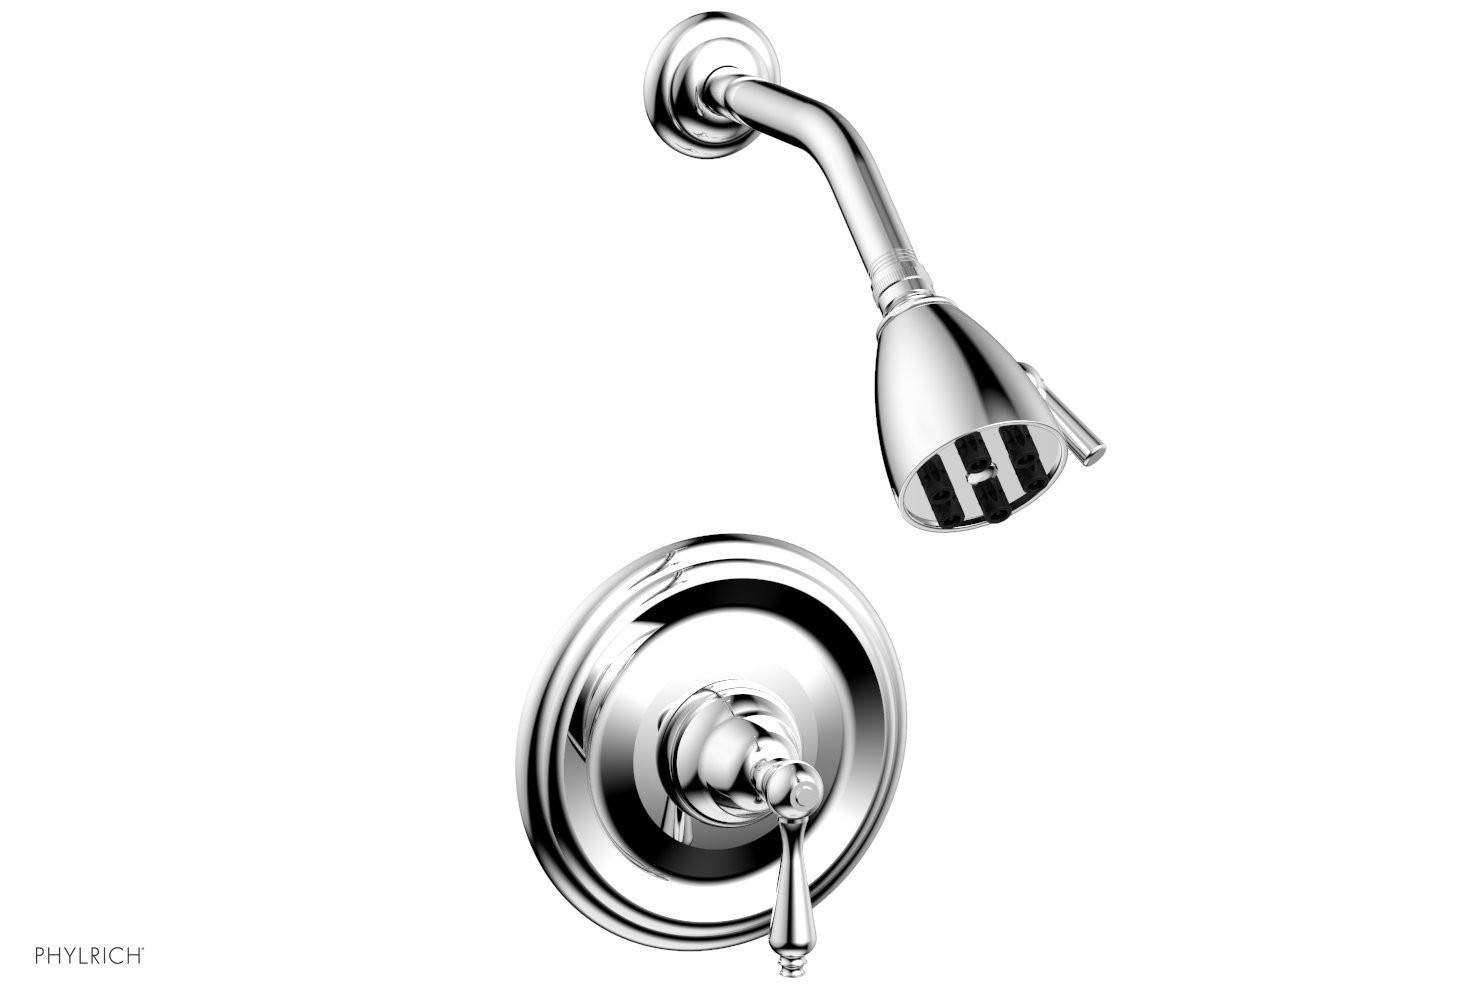 PHYLRICH DPB3100 REVERE & SAVANNAH WALL MOUNT PRESSURE BALANCE SHOWER SET WITH STRAIGHT LEVER HANDLE